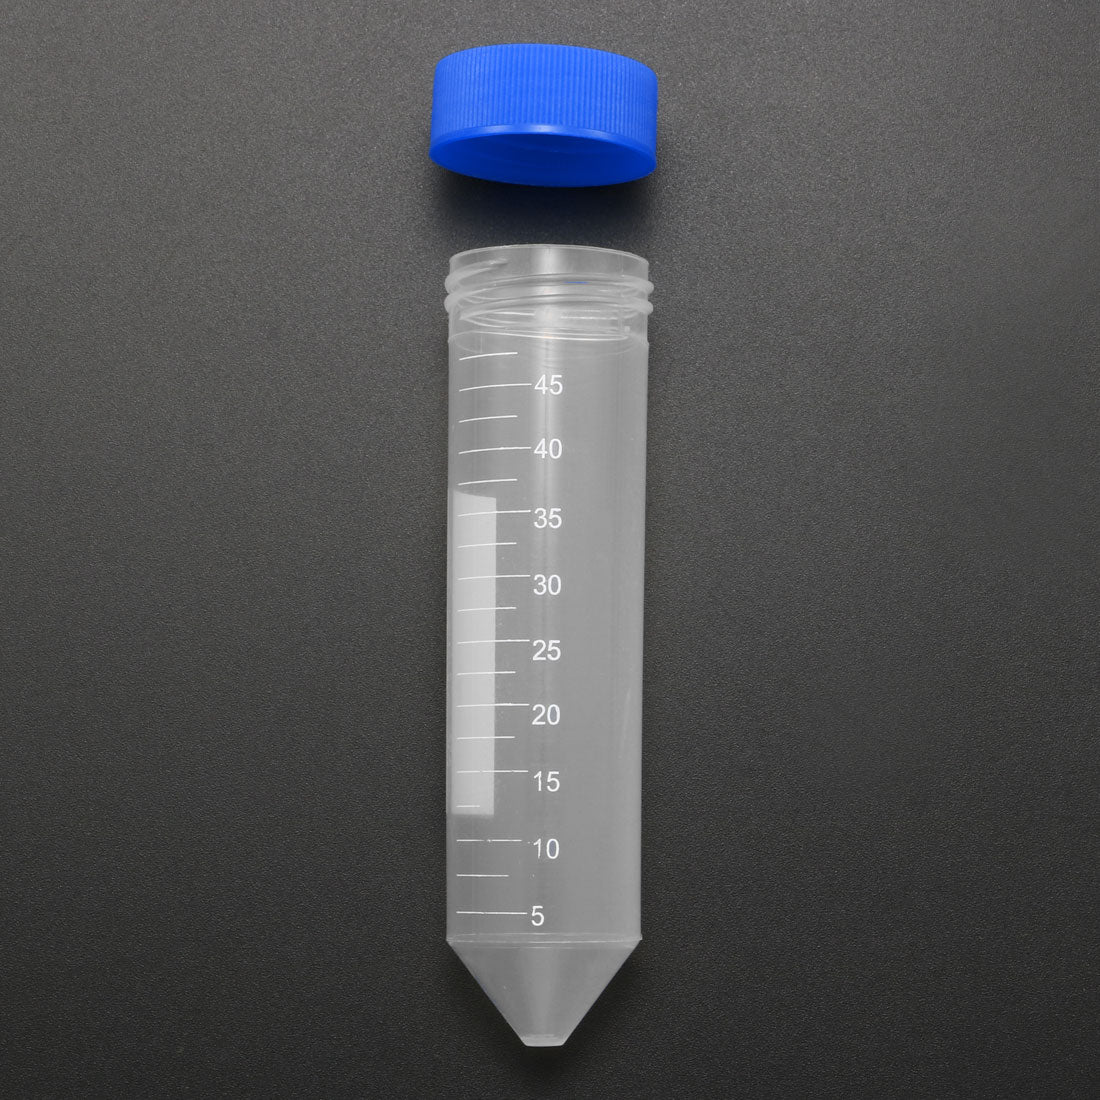 uxcell Uxcell 10 Pcs 45ml Plastic Centrifuge Tubes with Blue Screw Cap, Conical Bottom, Graduated Marks